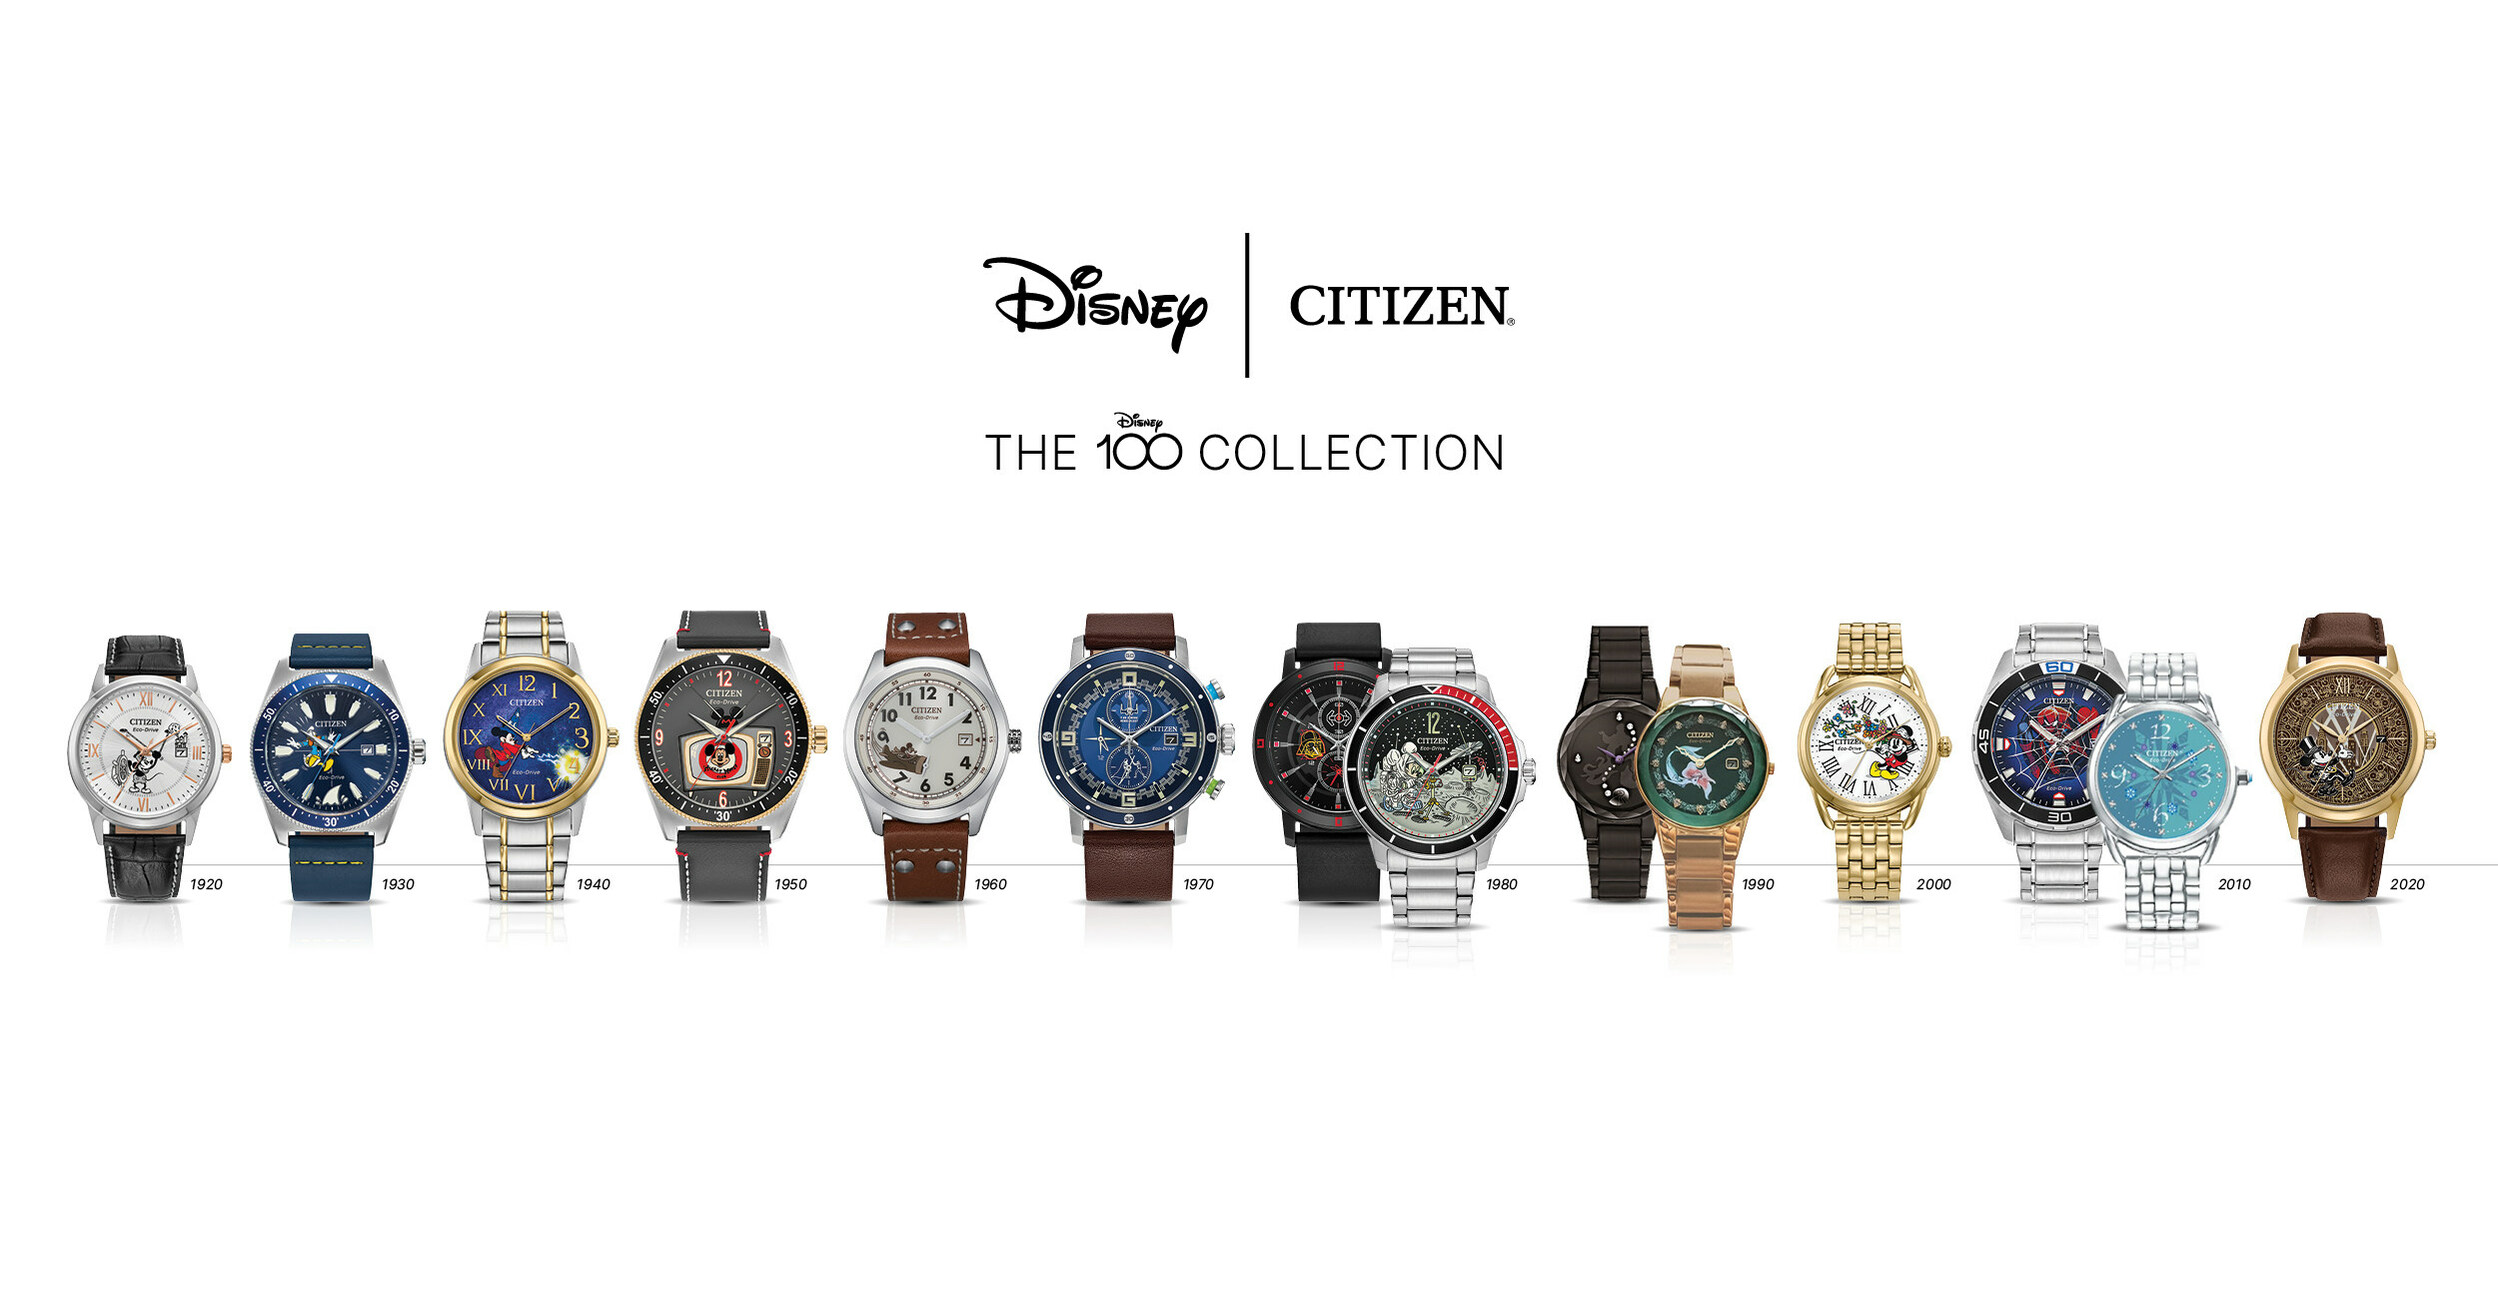 CITIZEN LAUNCHES A COLLECTION OF COMMEMORATIVE DISNEY, MARVEL, AND STAR  WARS™ WATCHES AS PART OF A YEAR-LONG TRIBUTE TO DISNEY'S 100TH ANNIVERSARY